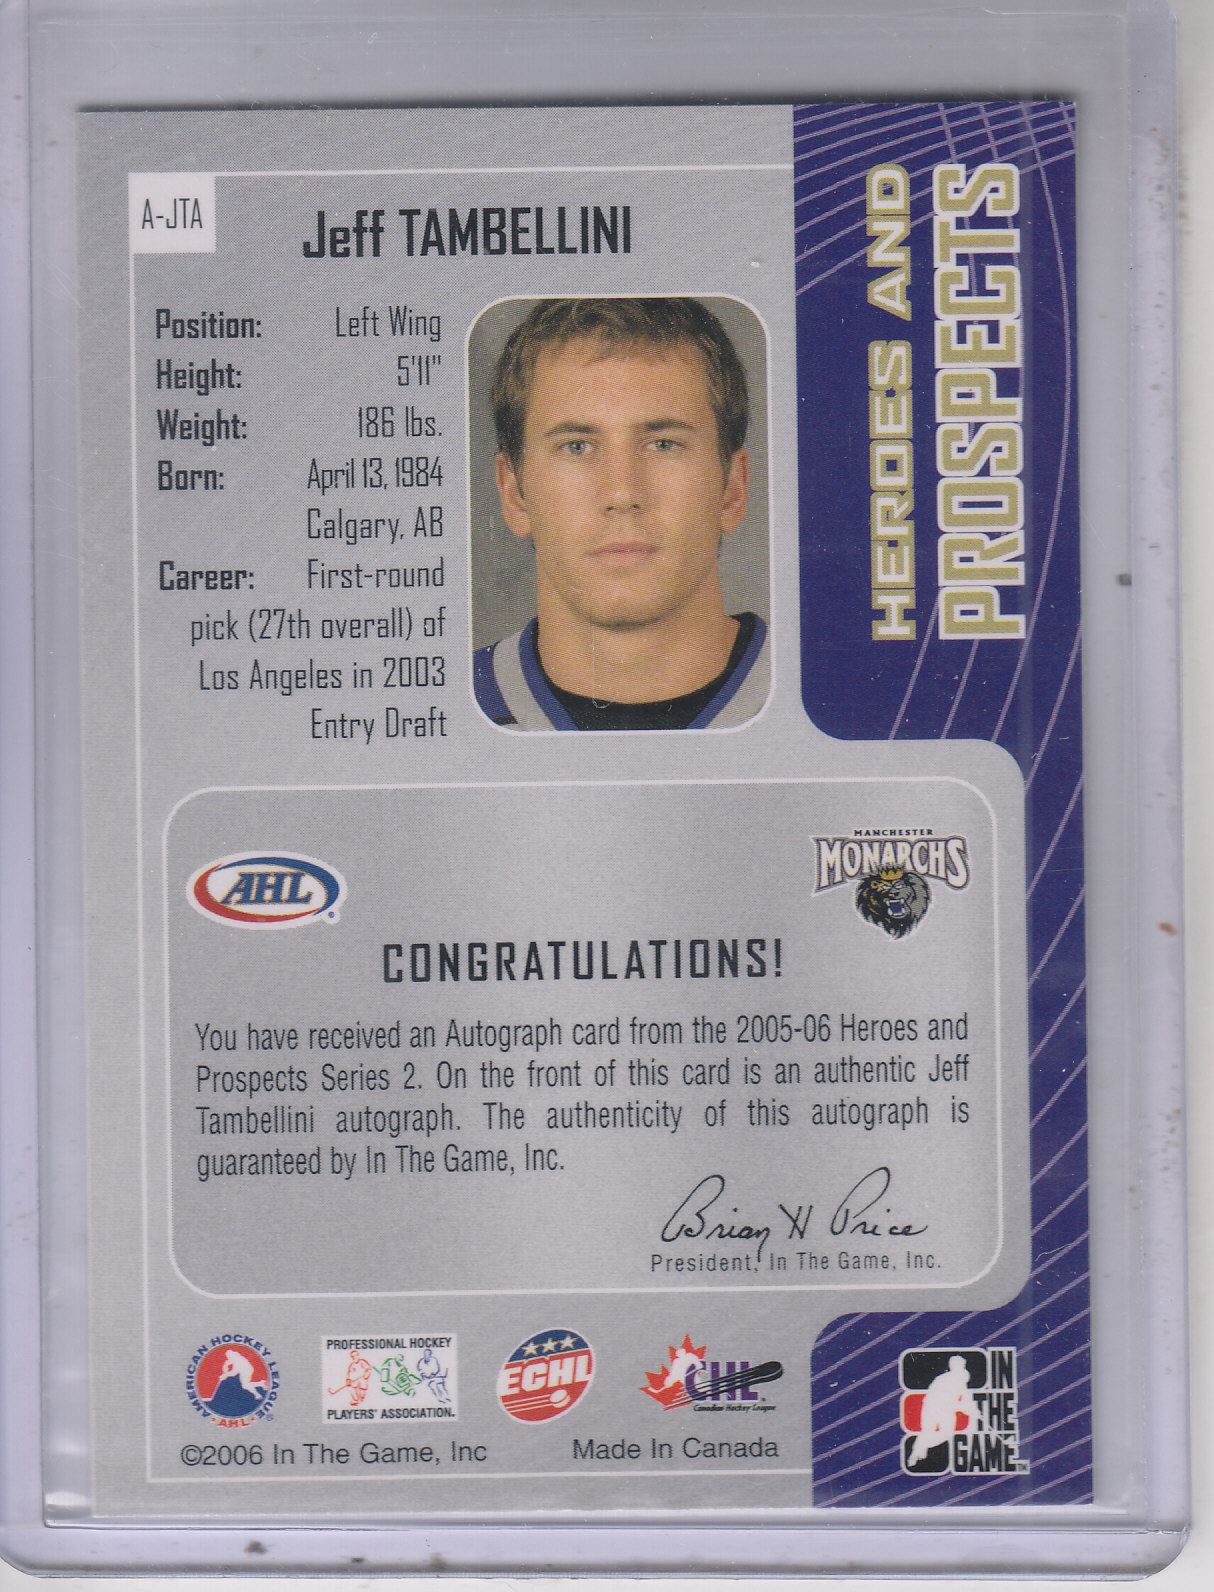 2005-06 ITG Heroes and Prospects Autographs Series II #AJTA Jeff Tambellini back image